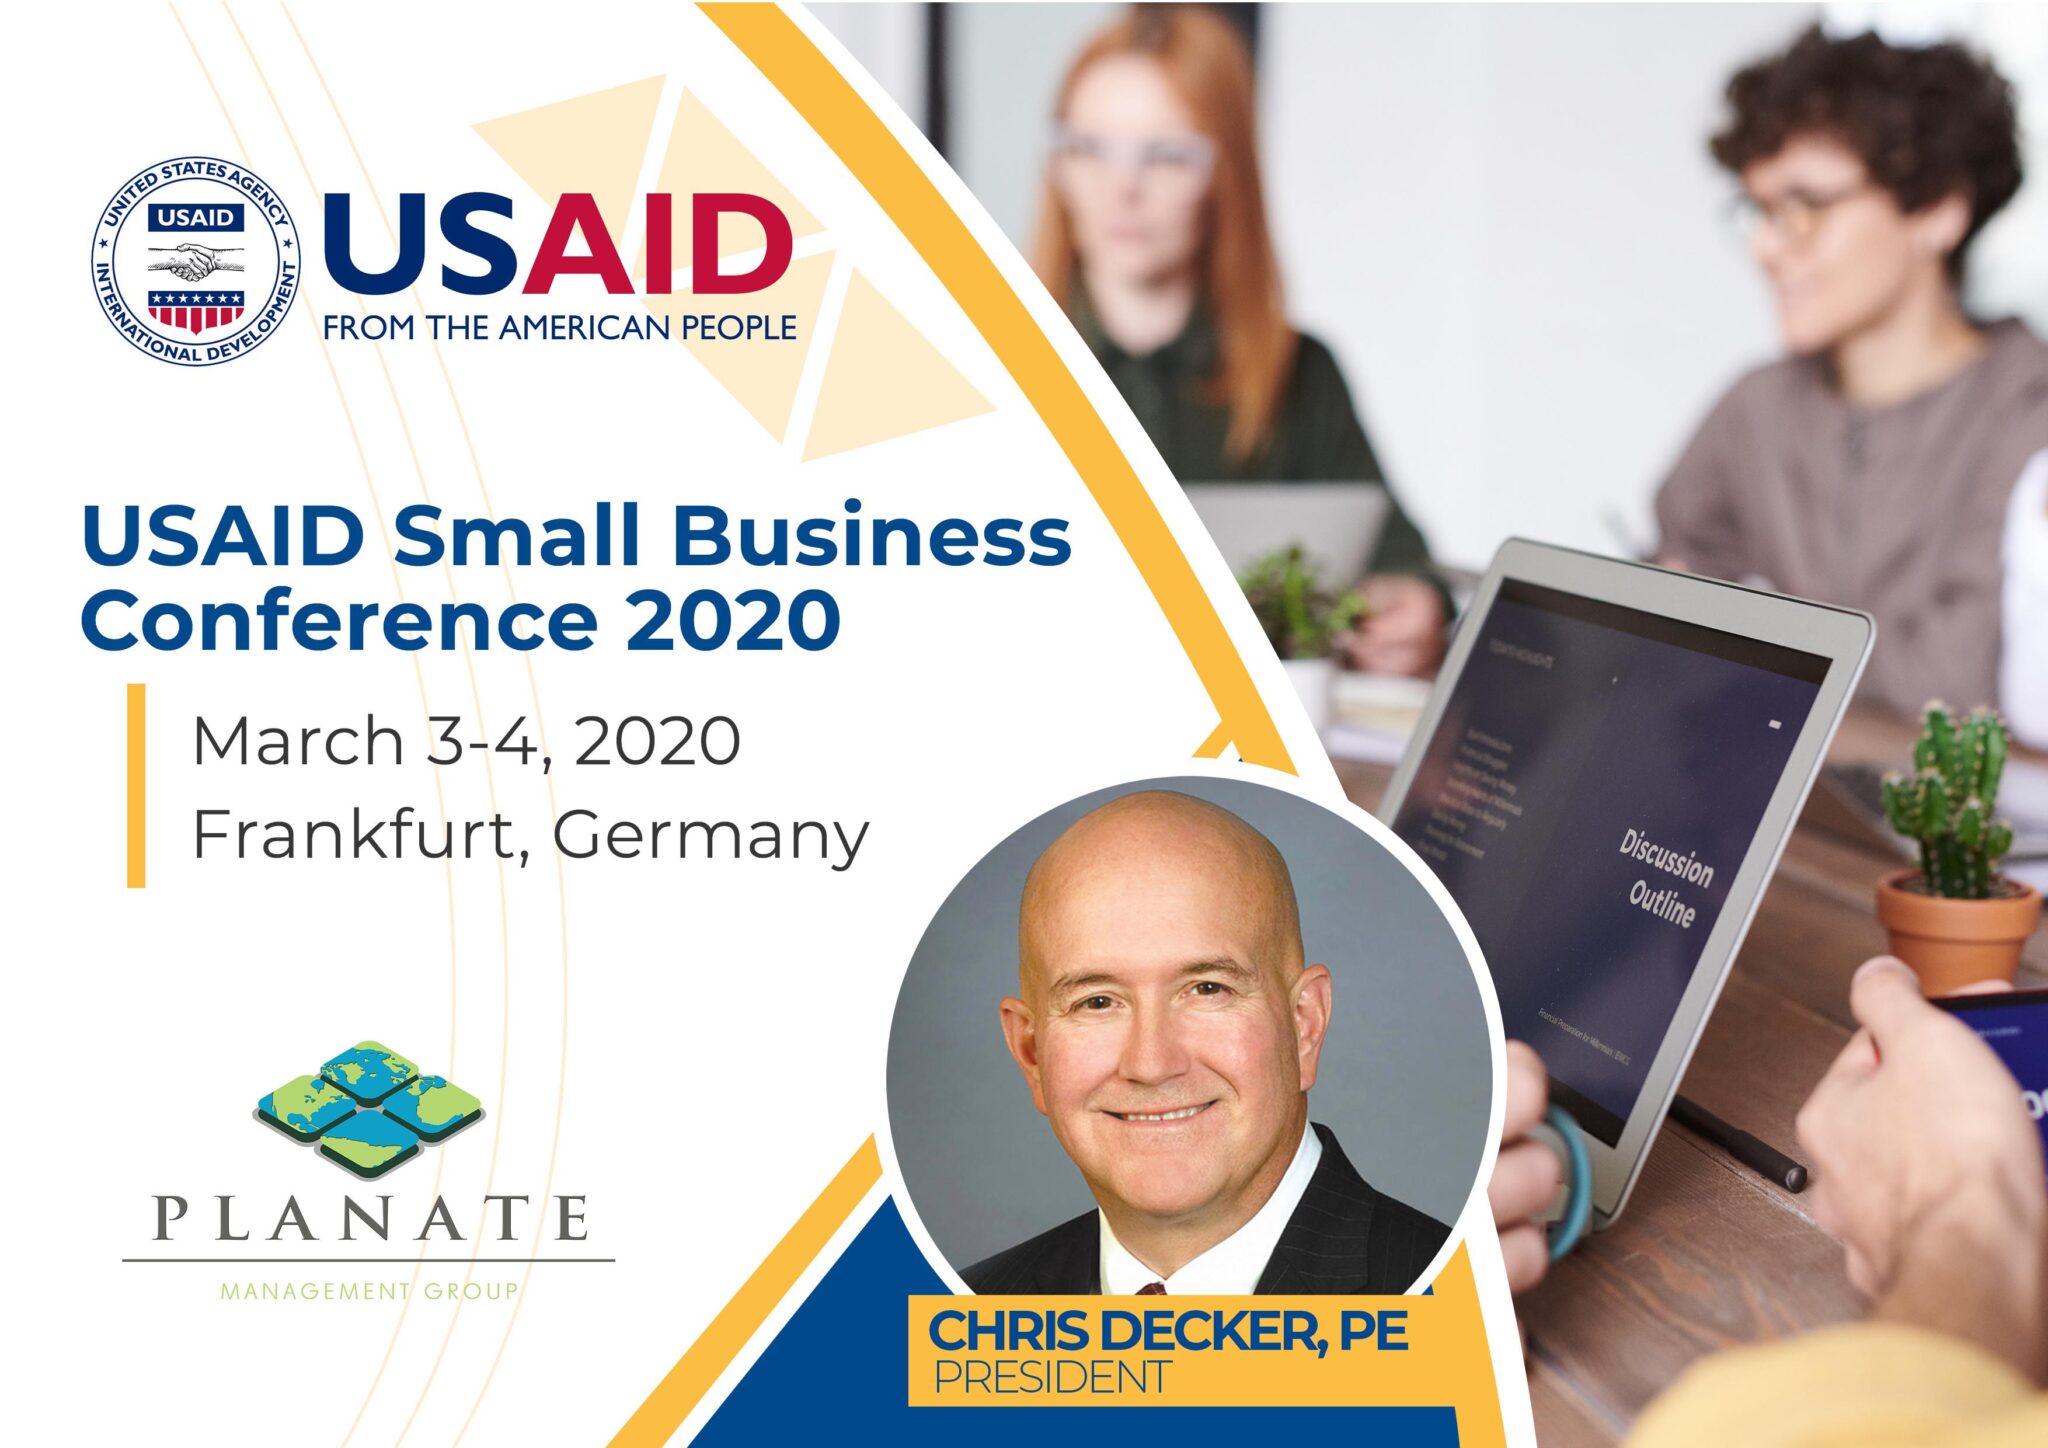 USAID Small Business Conference 2020 Planate Management Group